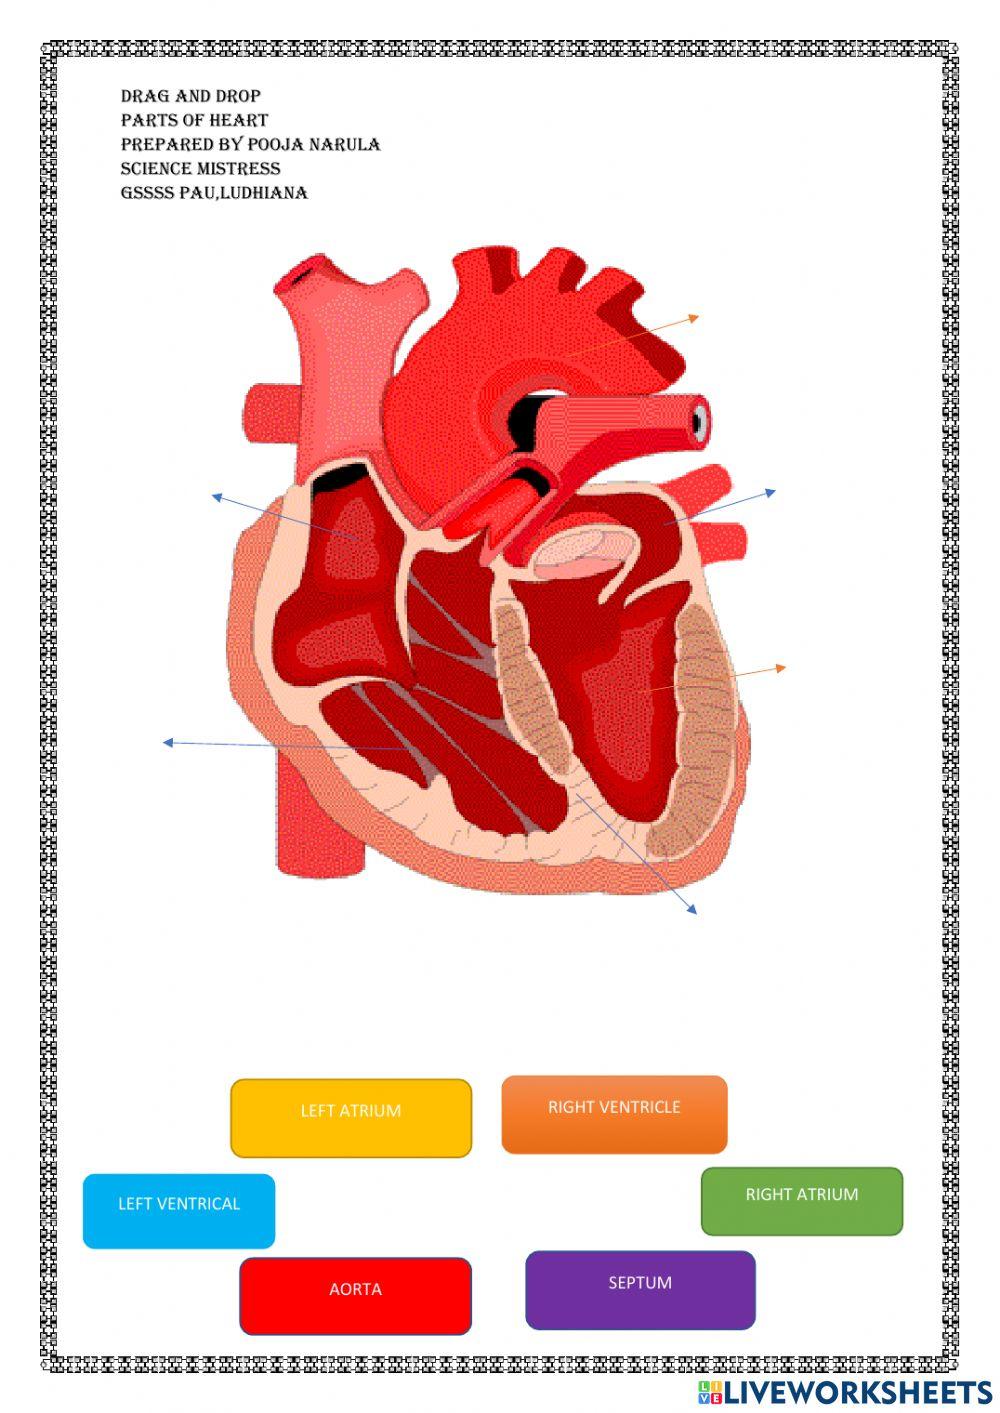 Parts of heart